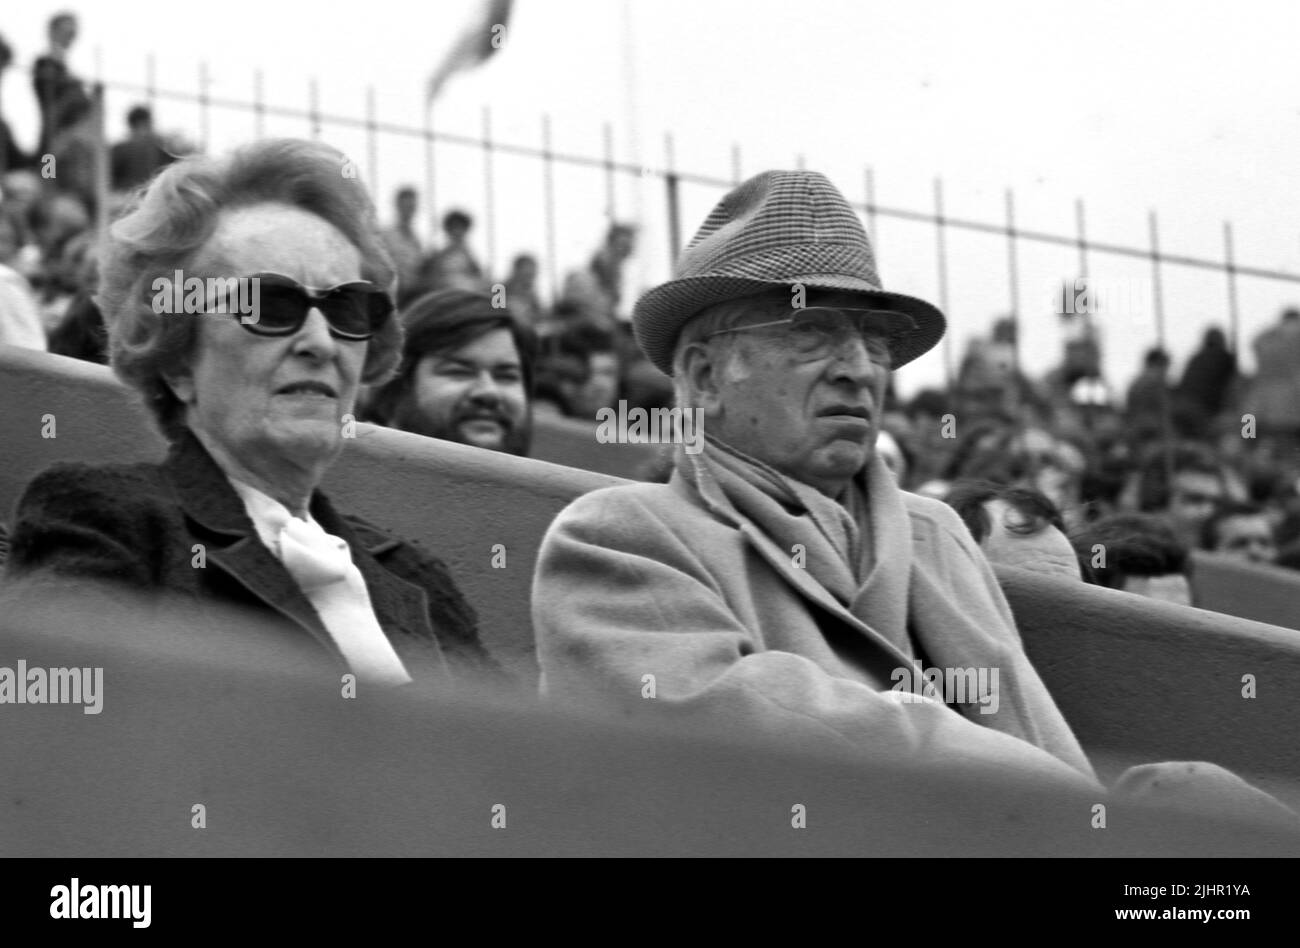 French tennis player René Lacoste with his wife Simone Thion de La Chaume attending a match at the 1978 French Open. Paris, Roland-Garros stadium, 1978 Stock Photo